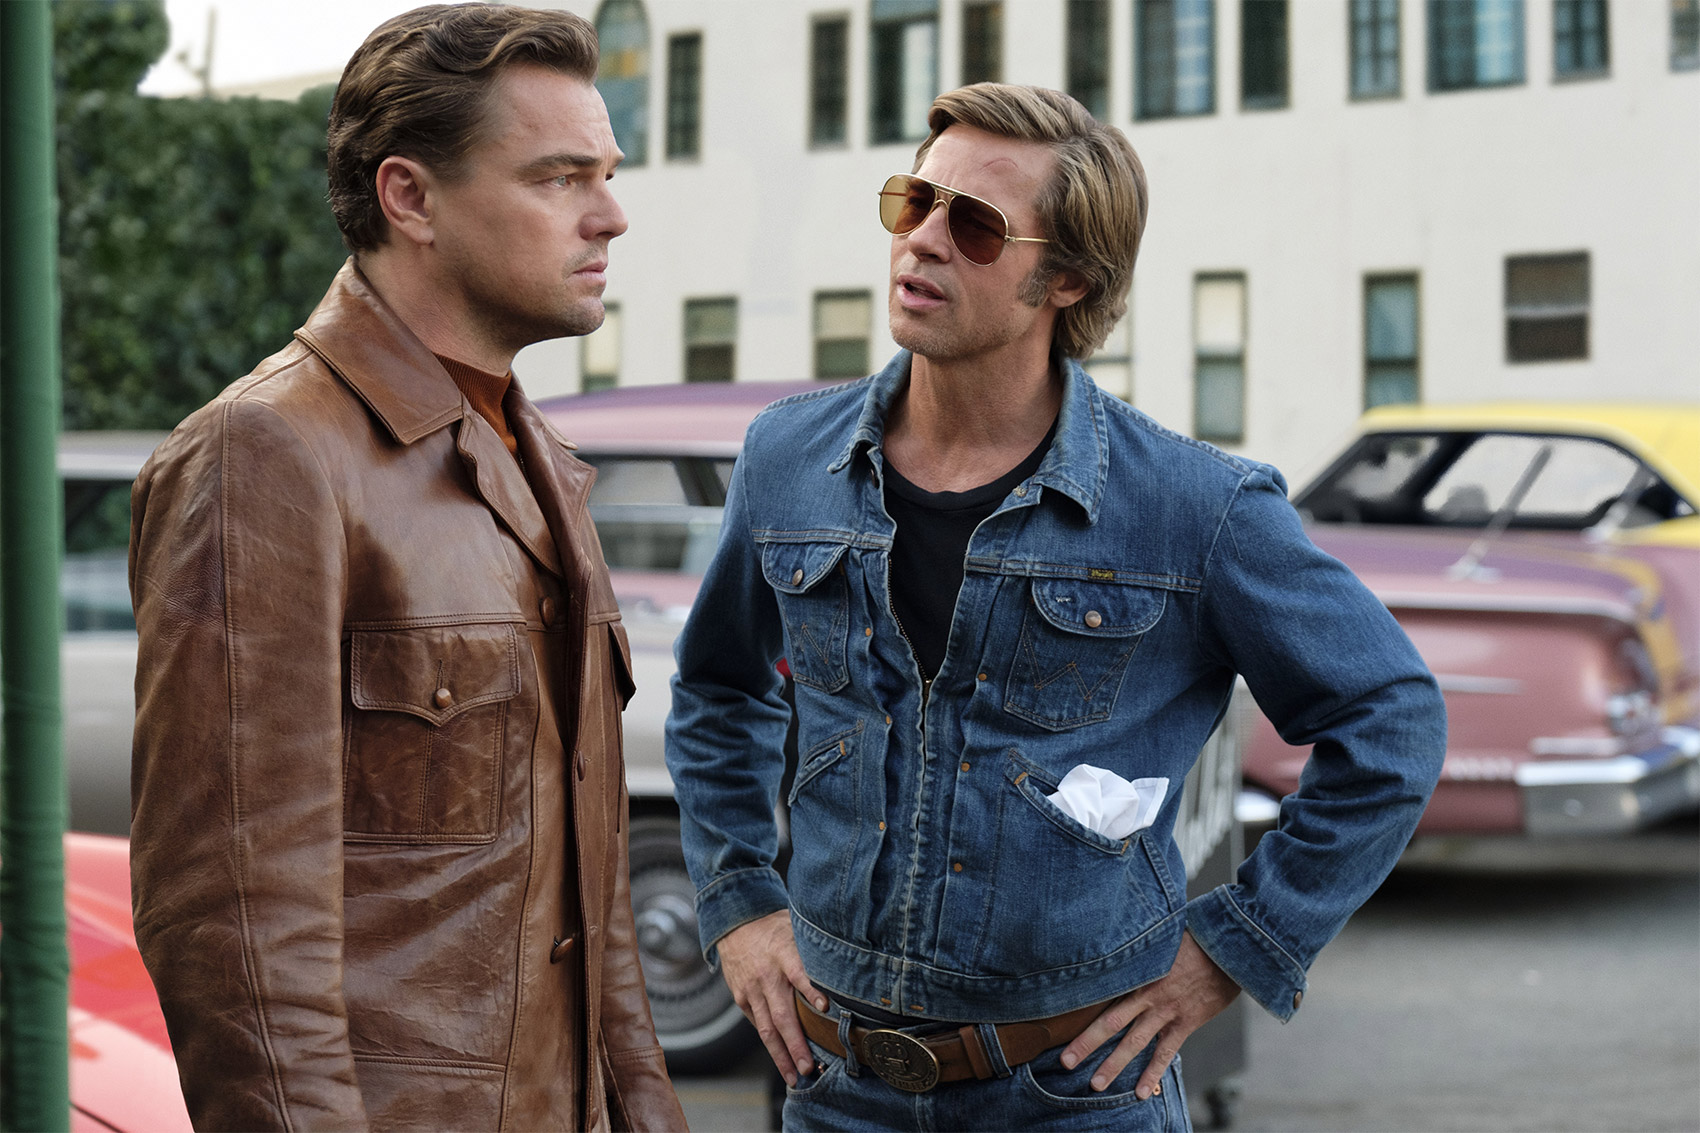 An Ode to the Golden Era – A Review of Once Upon a Time in Hollywood